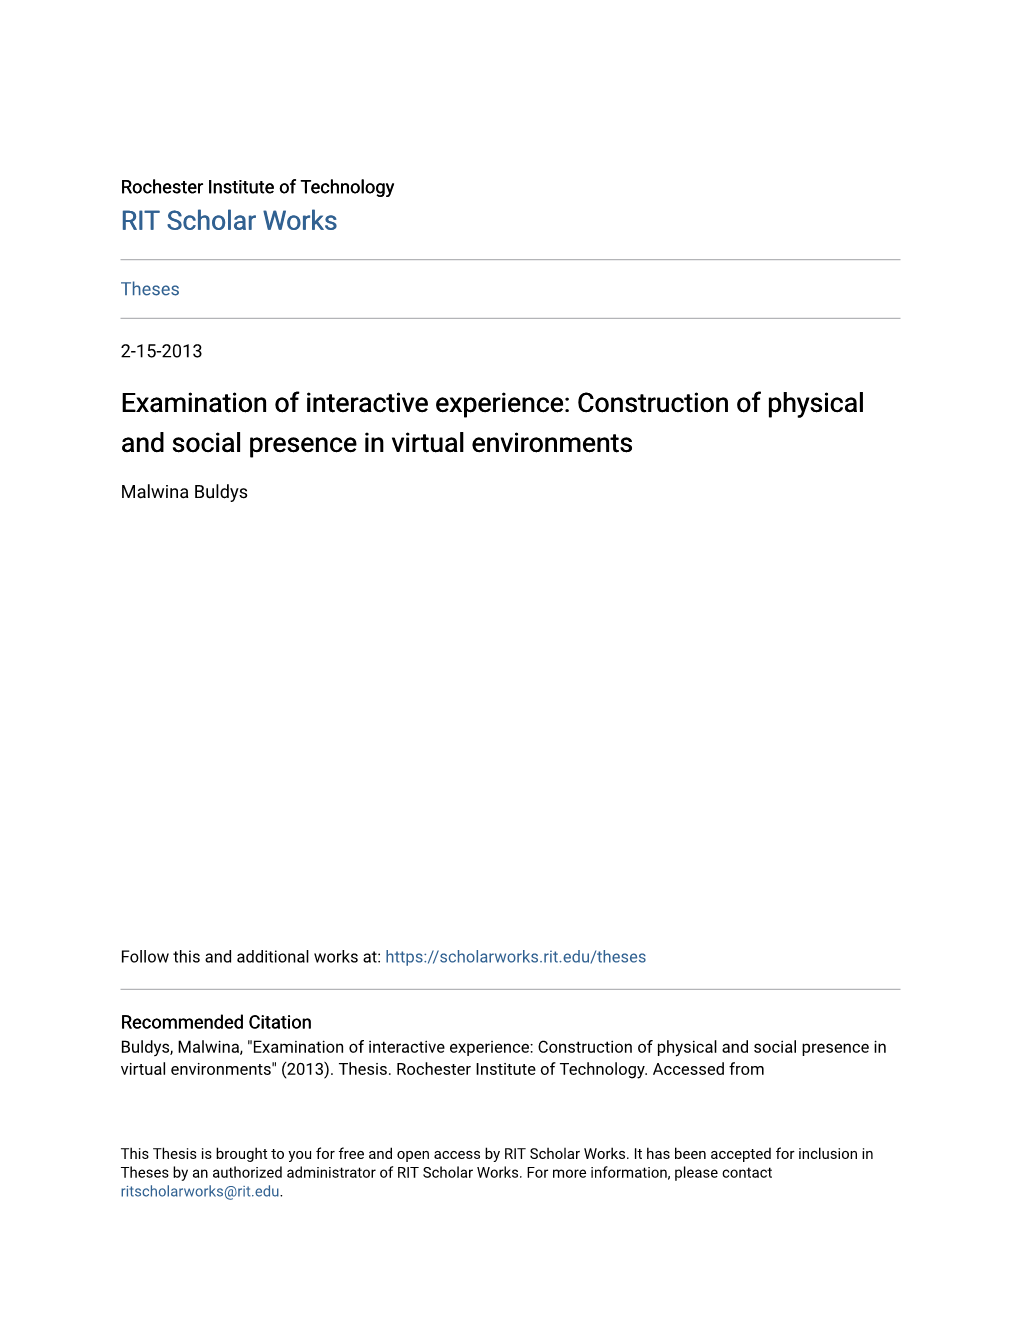 Construction of Physical and Social Presence in Virtual Environments